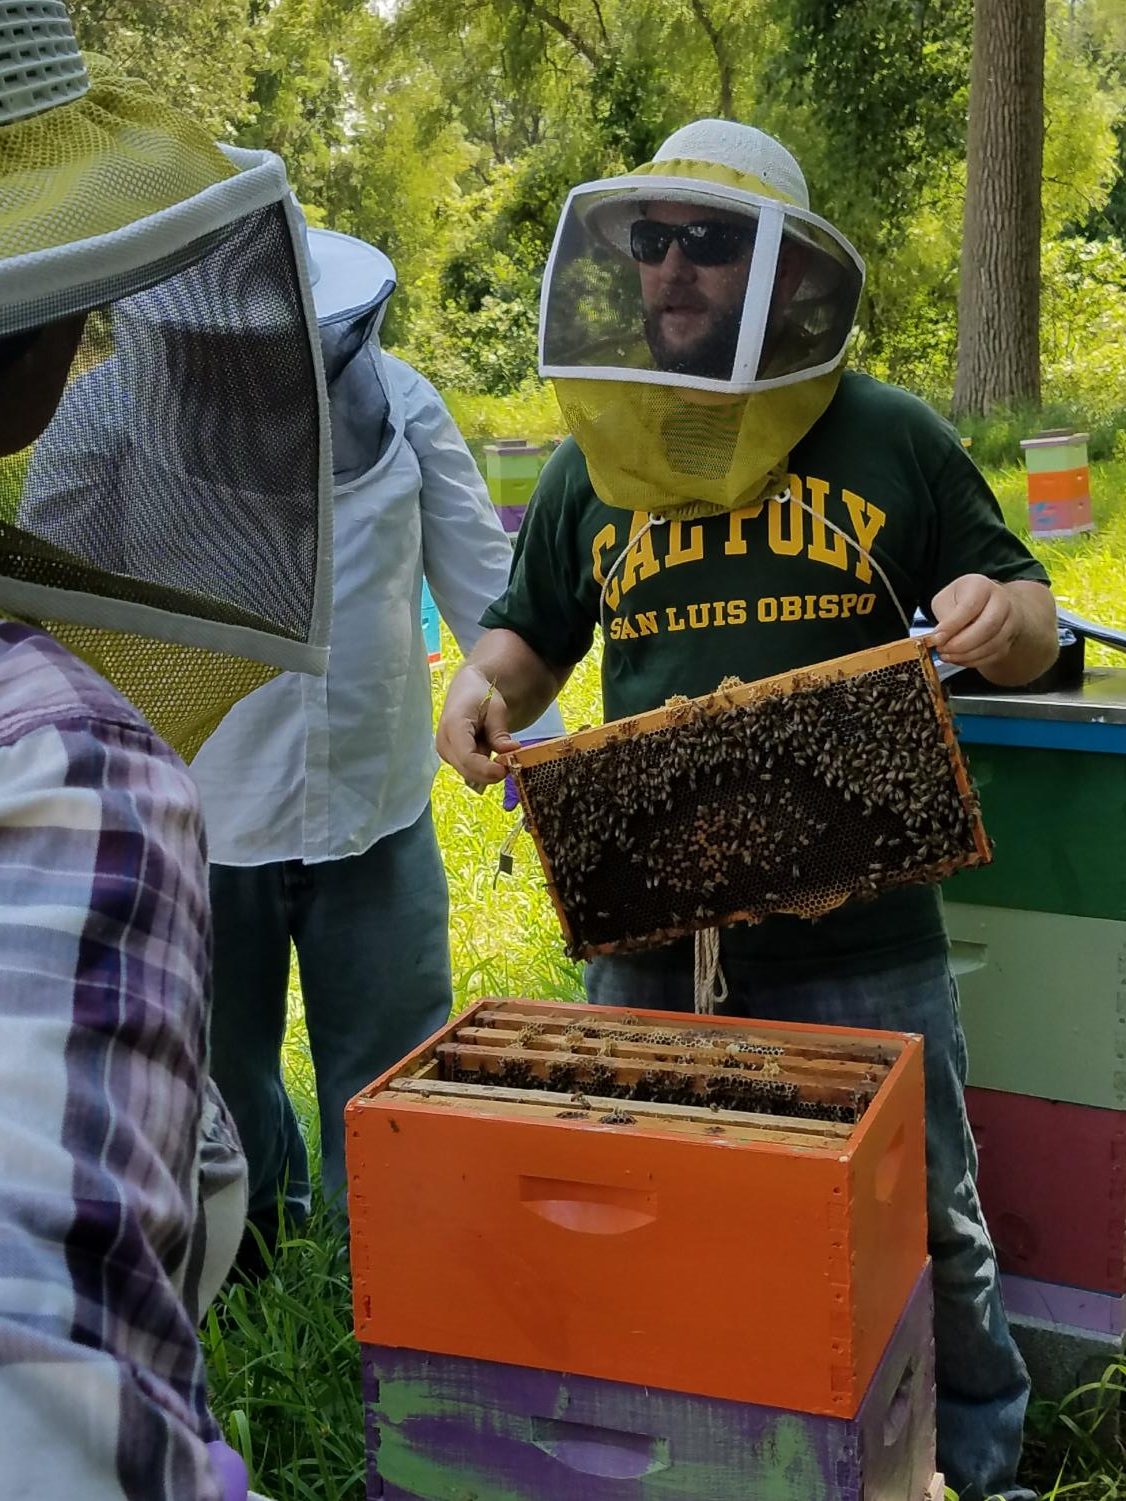 Heroes+to+Hives+Beekeeping+Course+Offered+at+UCM